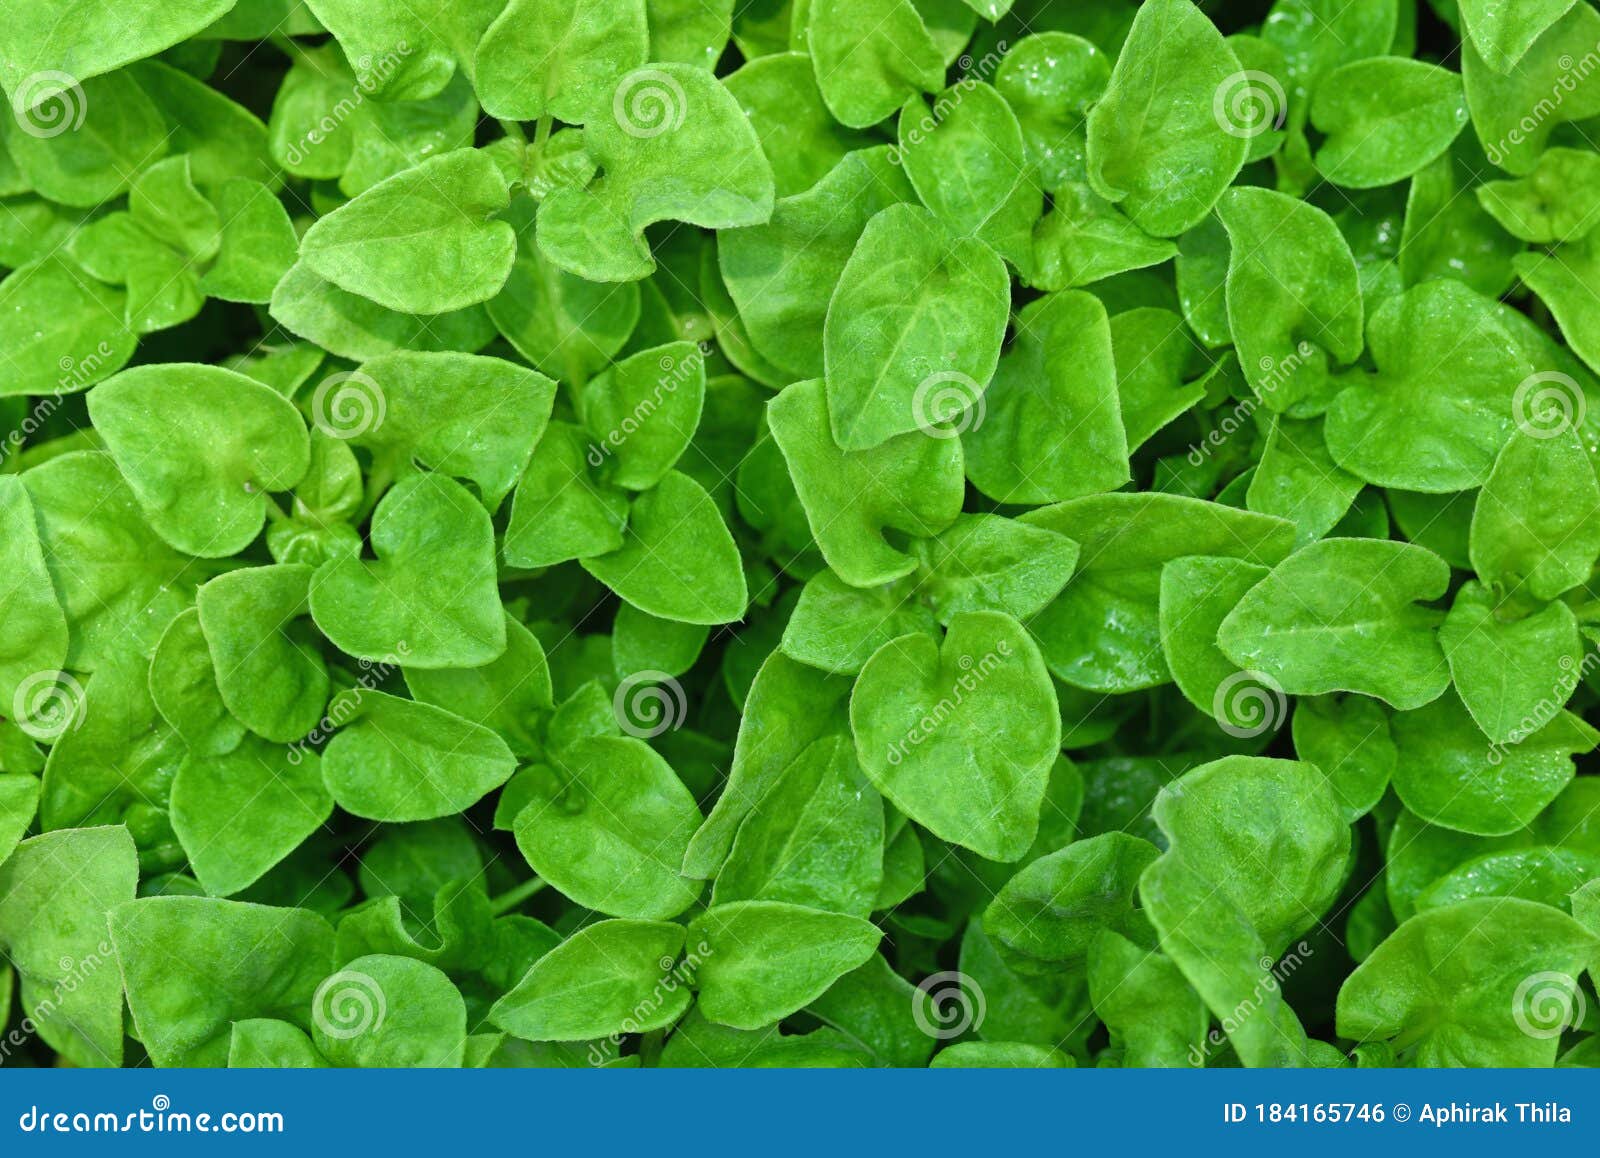 Top View Watercress Or Nasturtium Officinale Organic Growing In The Vegetable Garden Plant Green Leaf Texture Background Fresh Stock Photo Image Of Food Ingredient 184165746